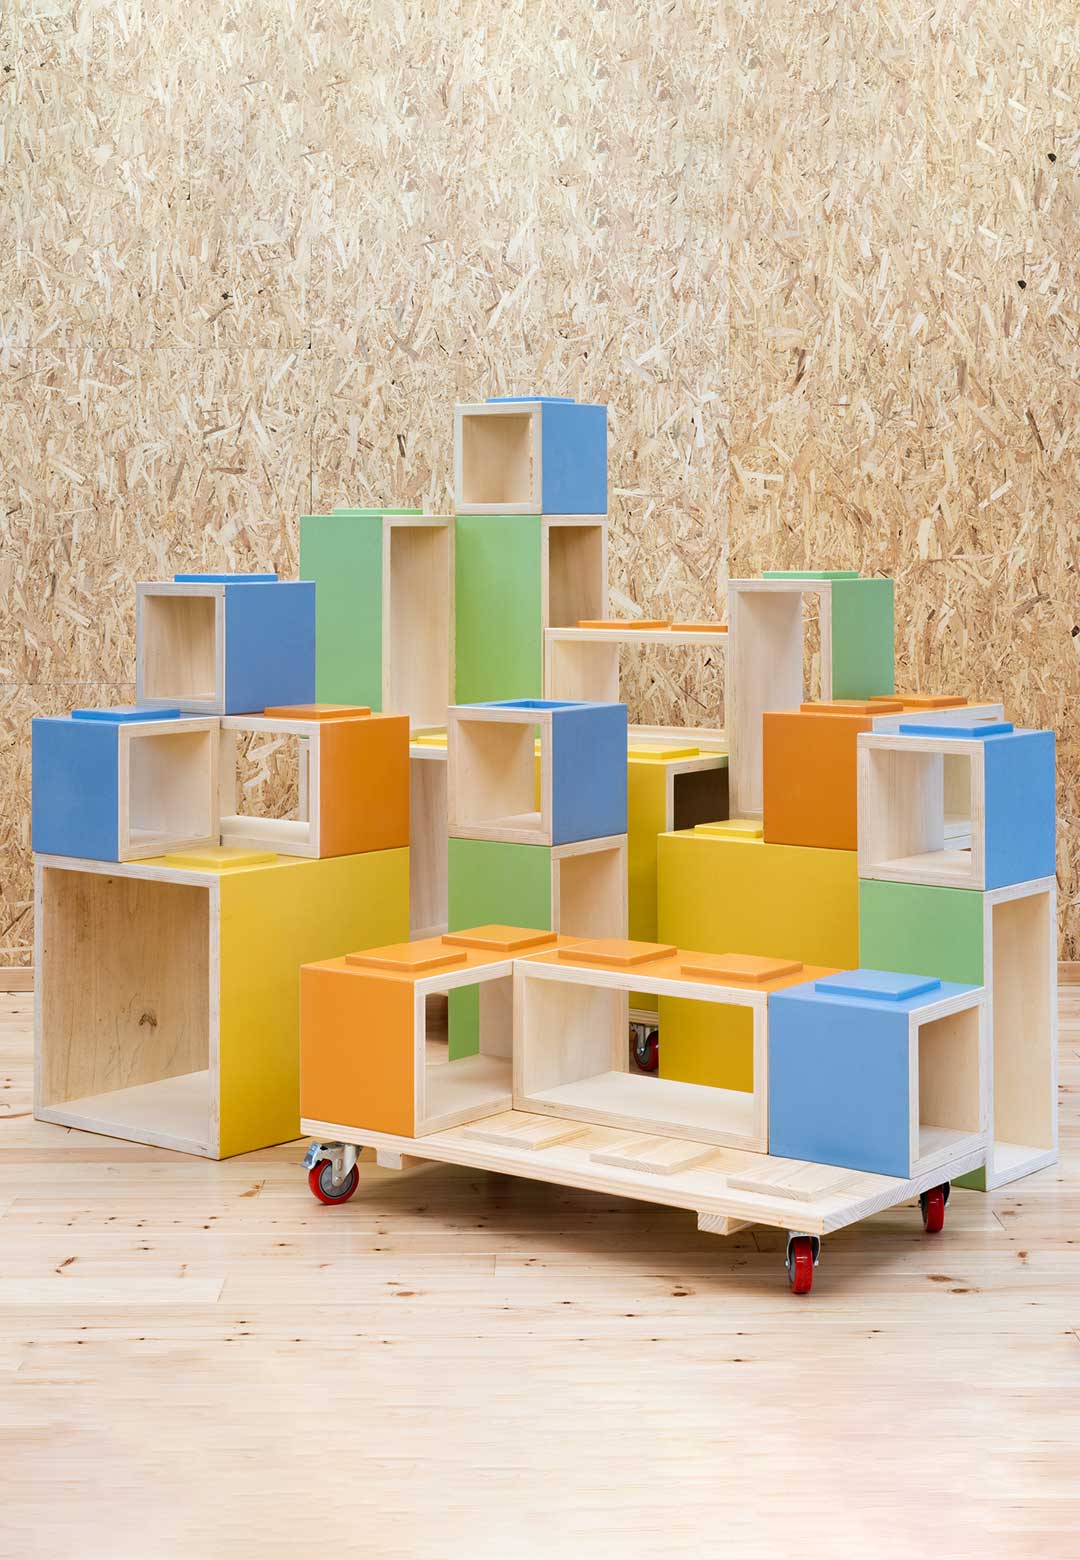 Play, learn, build: Miguel Saboya’s ‘QUOIN’ redefines early childhood education